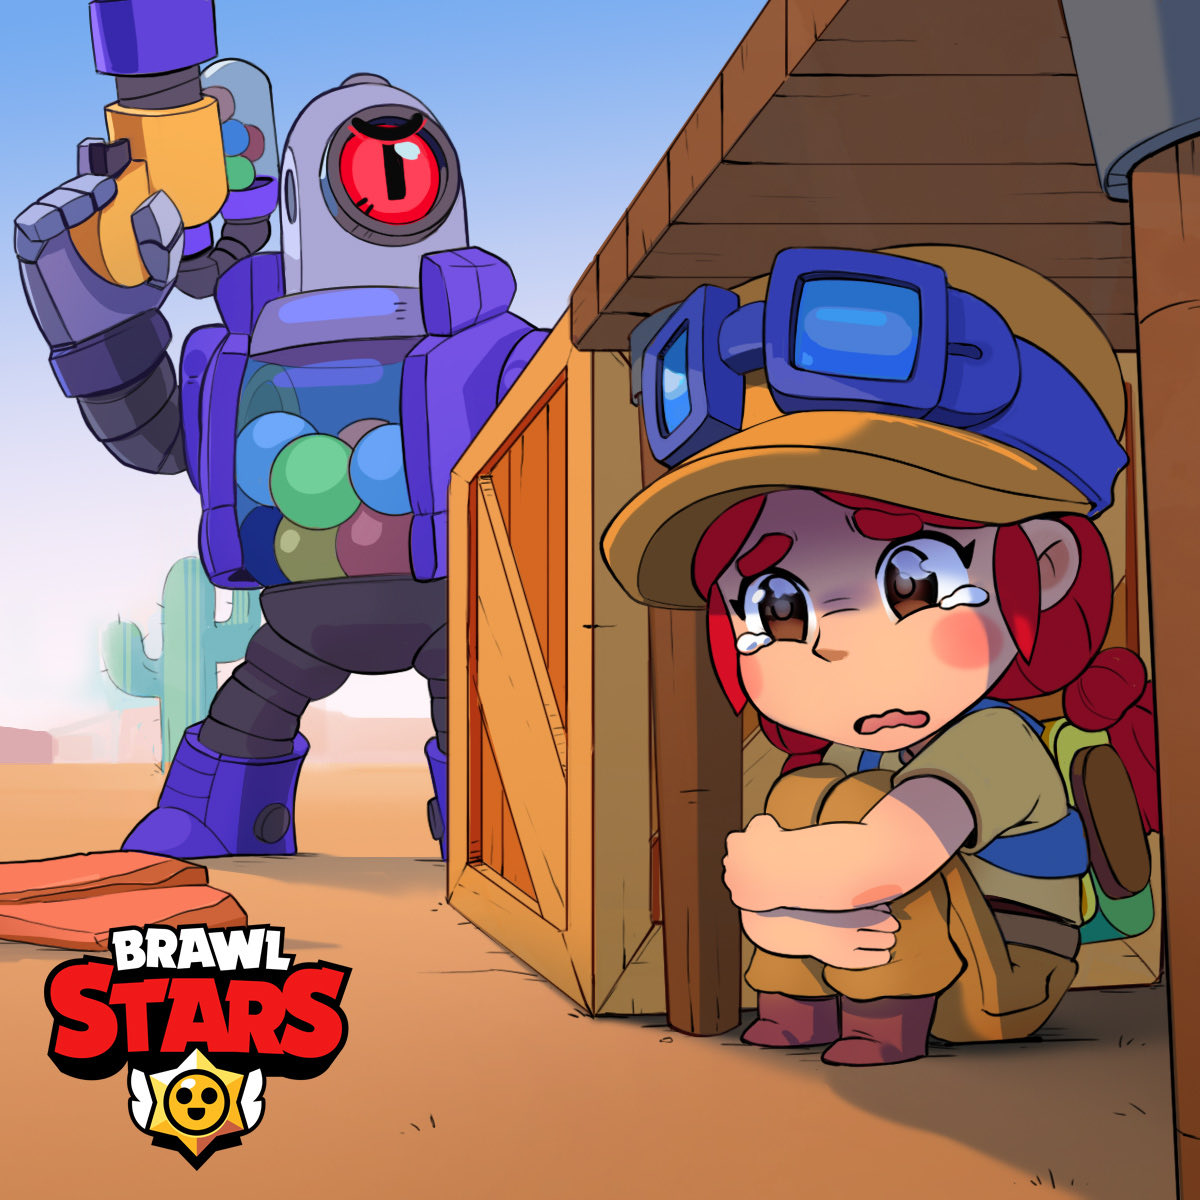 Code Ashbs On Twitter Remember The Scared Jessie Hiding From Rico Meme The Tables Have Turned Jessie Is The Boss Now Thank You So Much Nana7bs For This Amazing Artwork Jessiesrevenge - jesse brawl stars